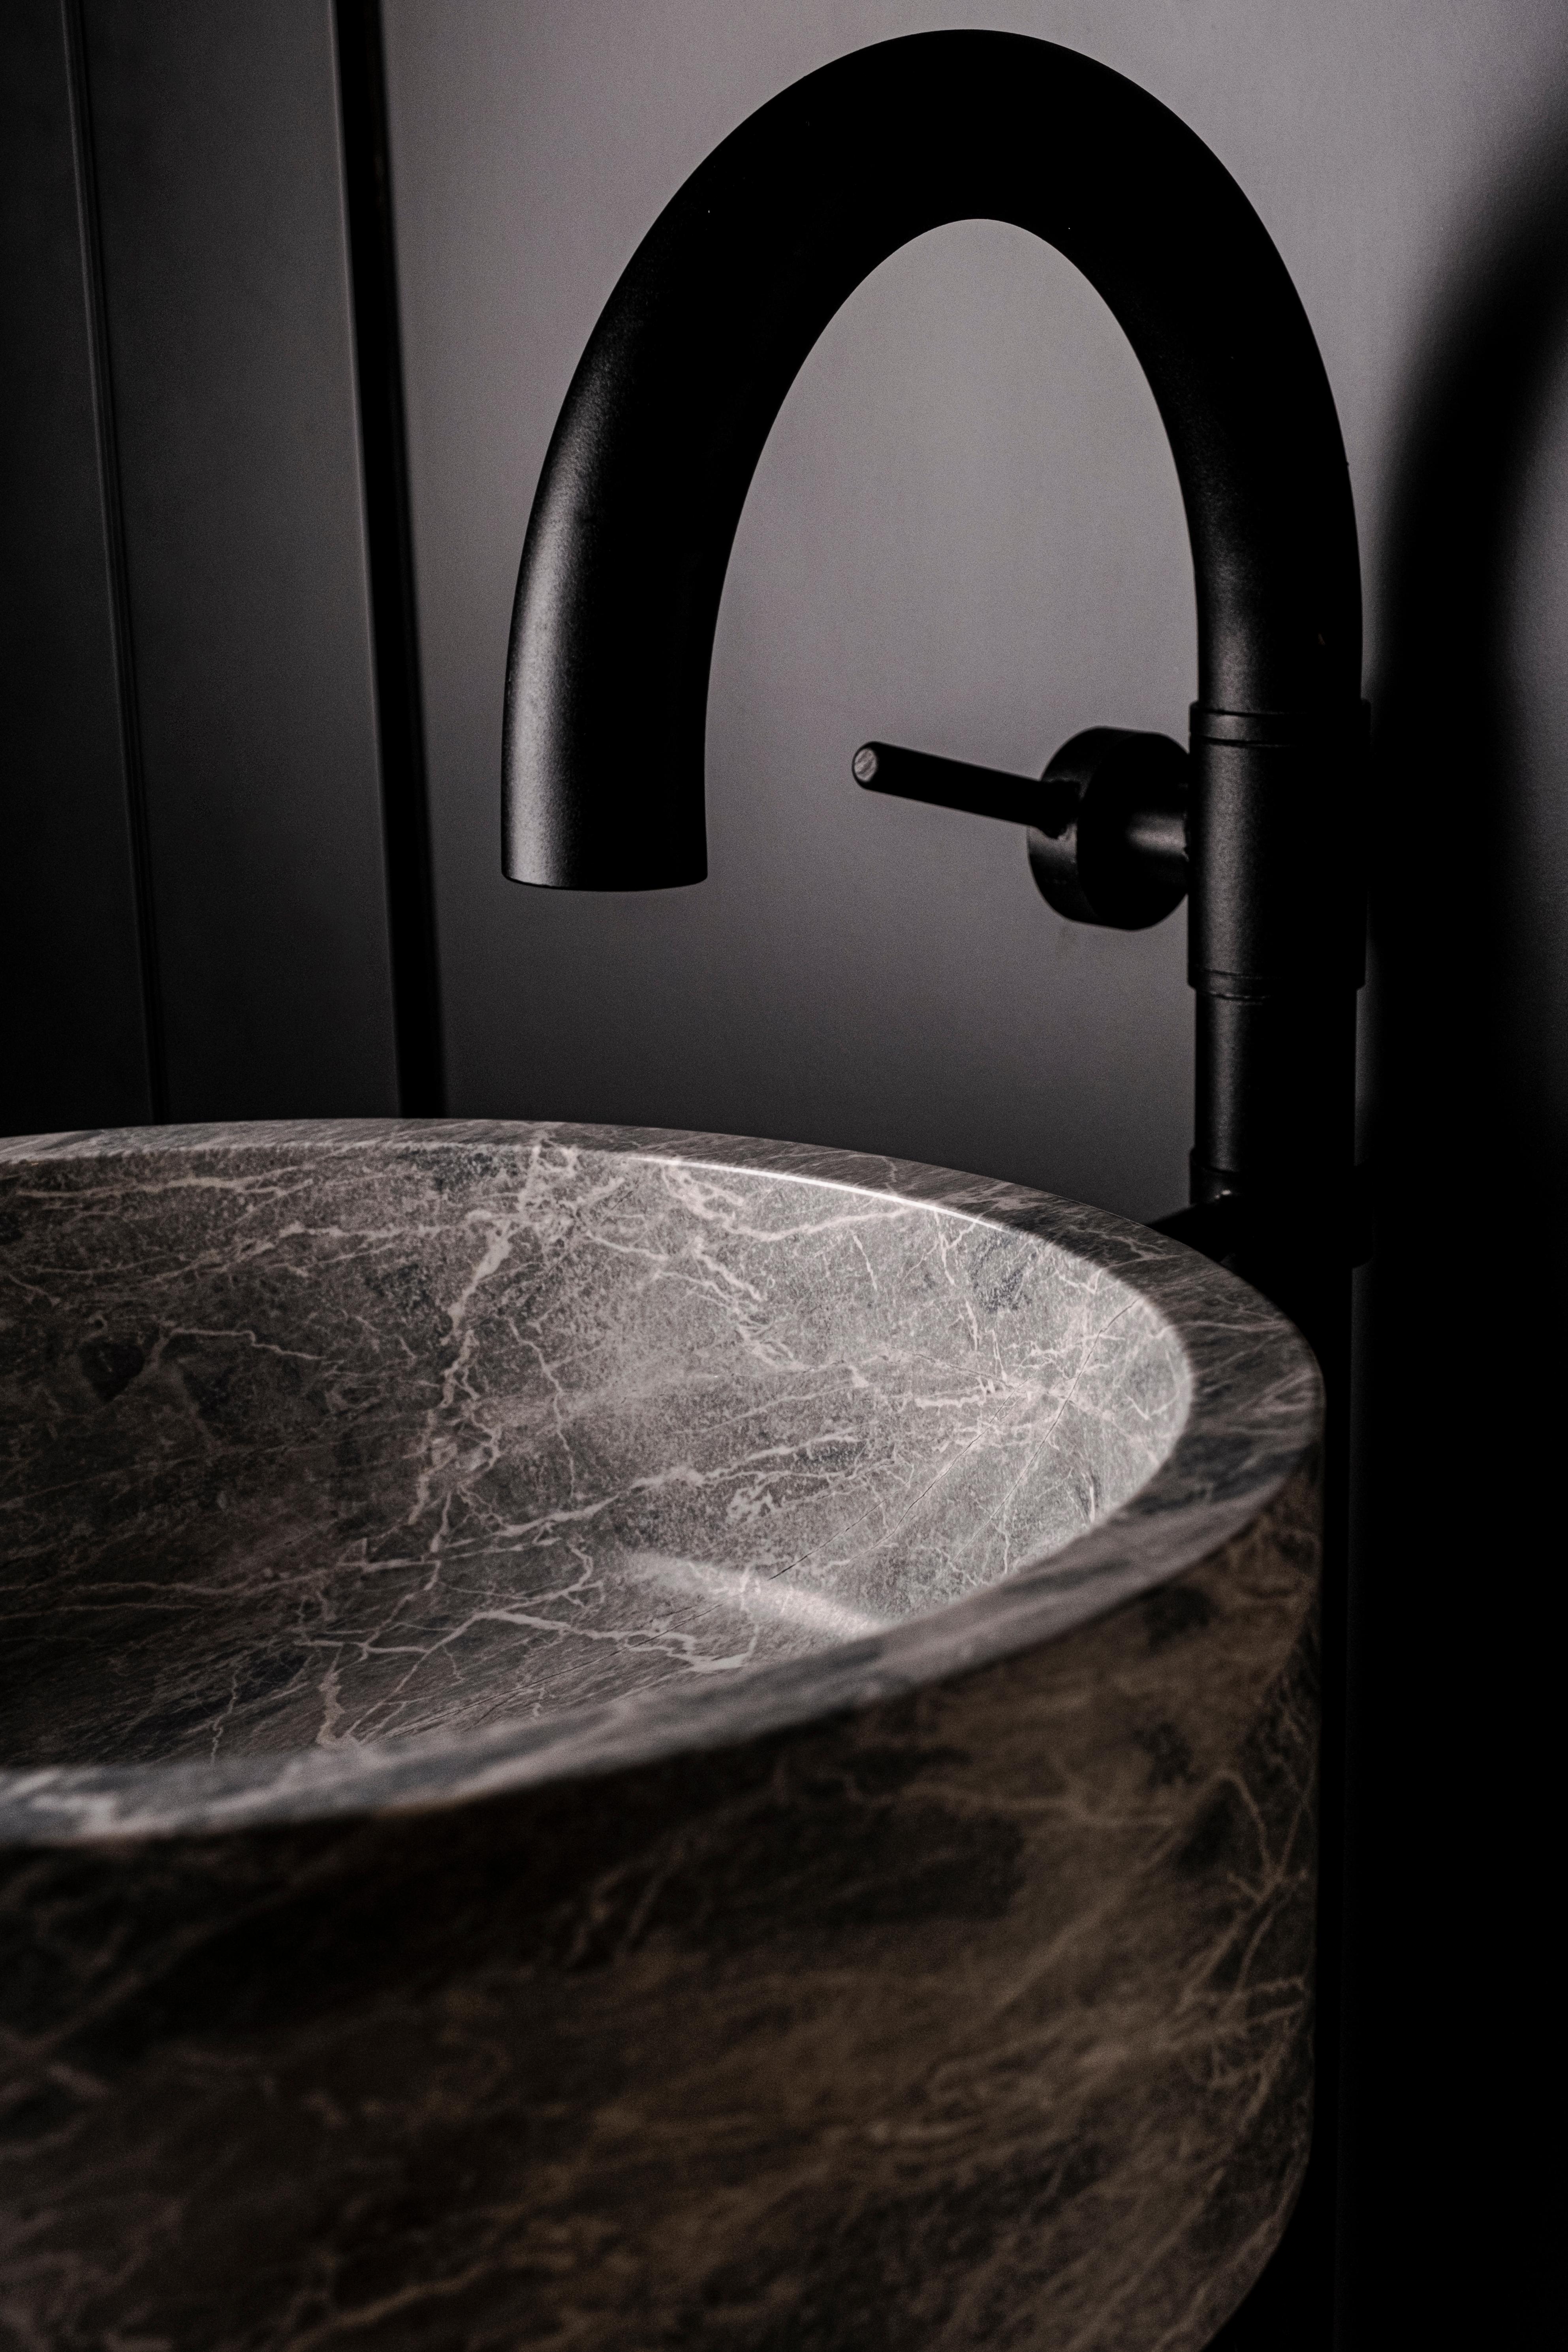 Designed by Yaman Pamukcu, Kurna was inspired by traditional bathroom products used in the past with the harmony of marble and metal and adapted to the present day with aesthetic touches. Feel the tradition in your bathrooms in the most natural way